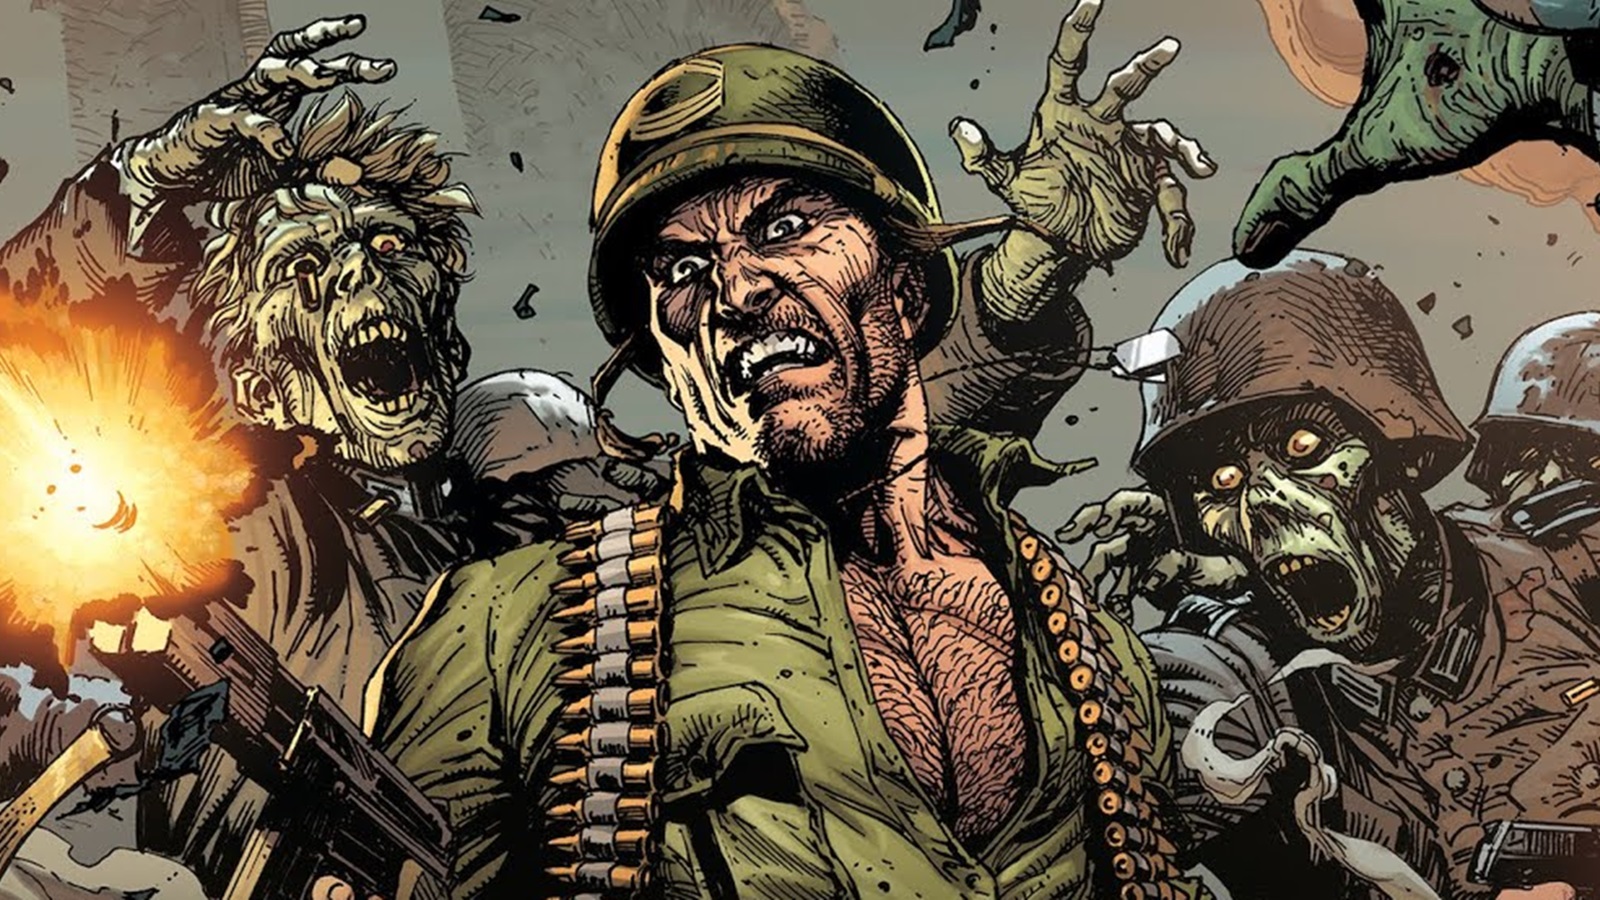 Bruce Campbell proposed to Sam Raimi to make the film Sgt. Rock vs. The Army of the Dead